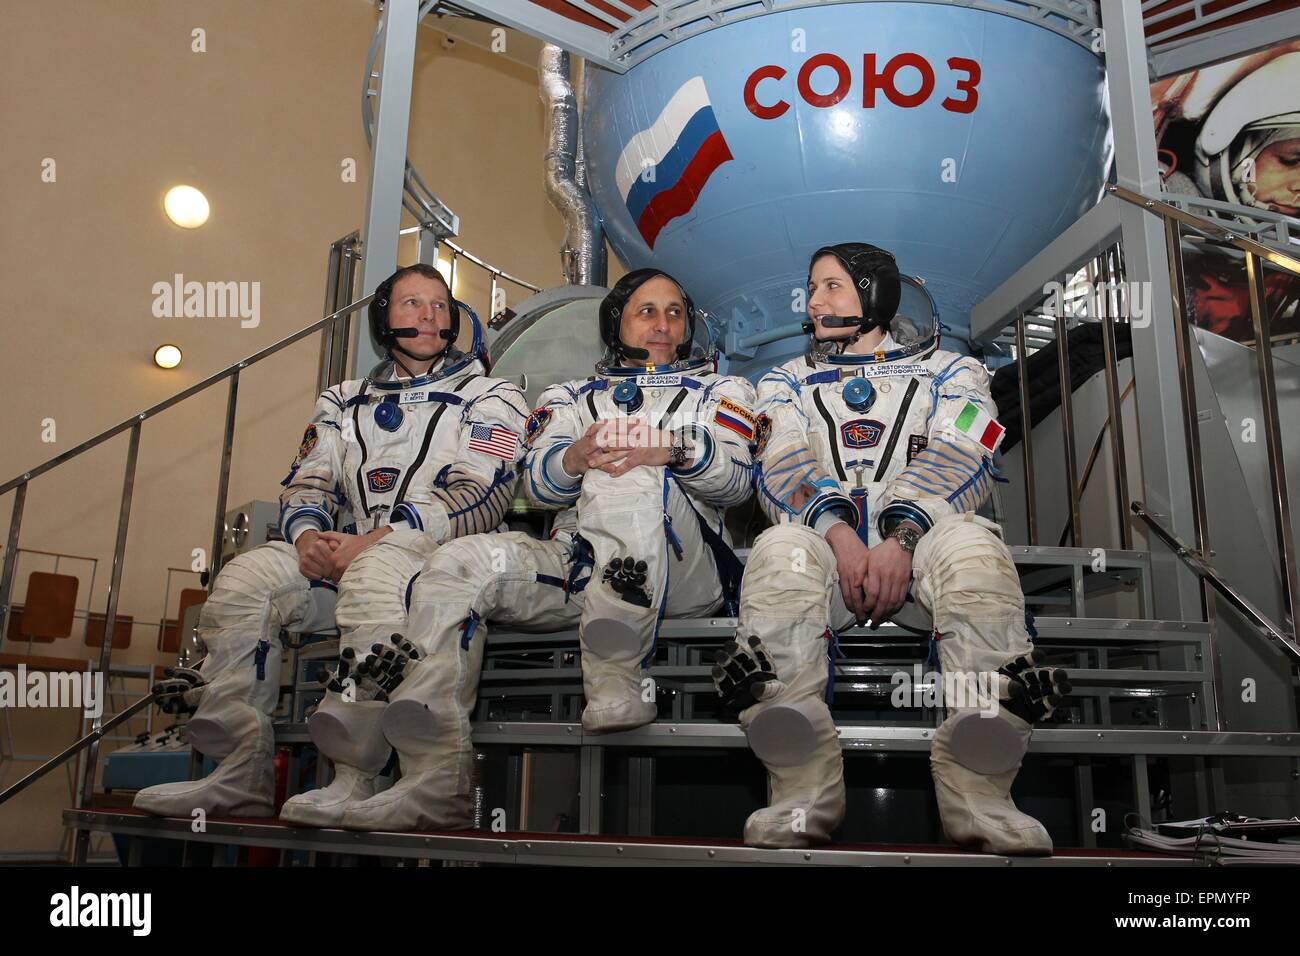 International Space Station Expedition 40 backup crew members NASA astronaut Terry Virts (left), Soyuz commander Anton Shkaplerov and Samantha Cristoforetti of the European Space Agency (right) pose in front of a Soyuz simulator at the Gagarin Cosmonaut Training Center May 5, 2015 in Star City, Russia. Stock Photo